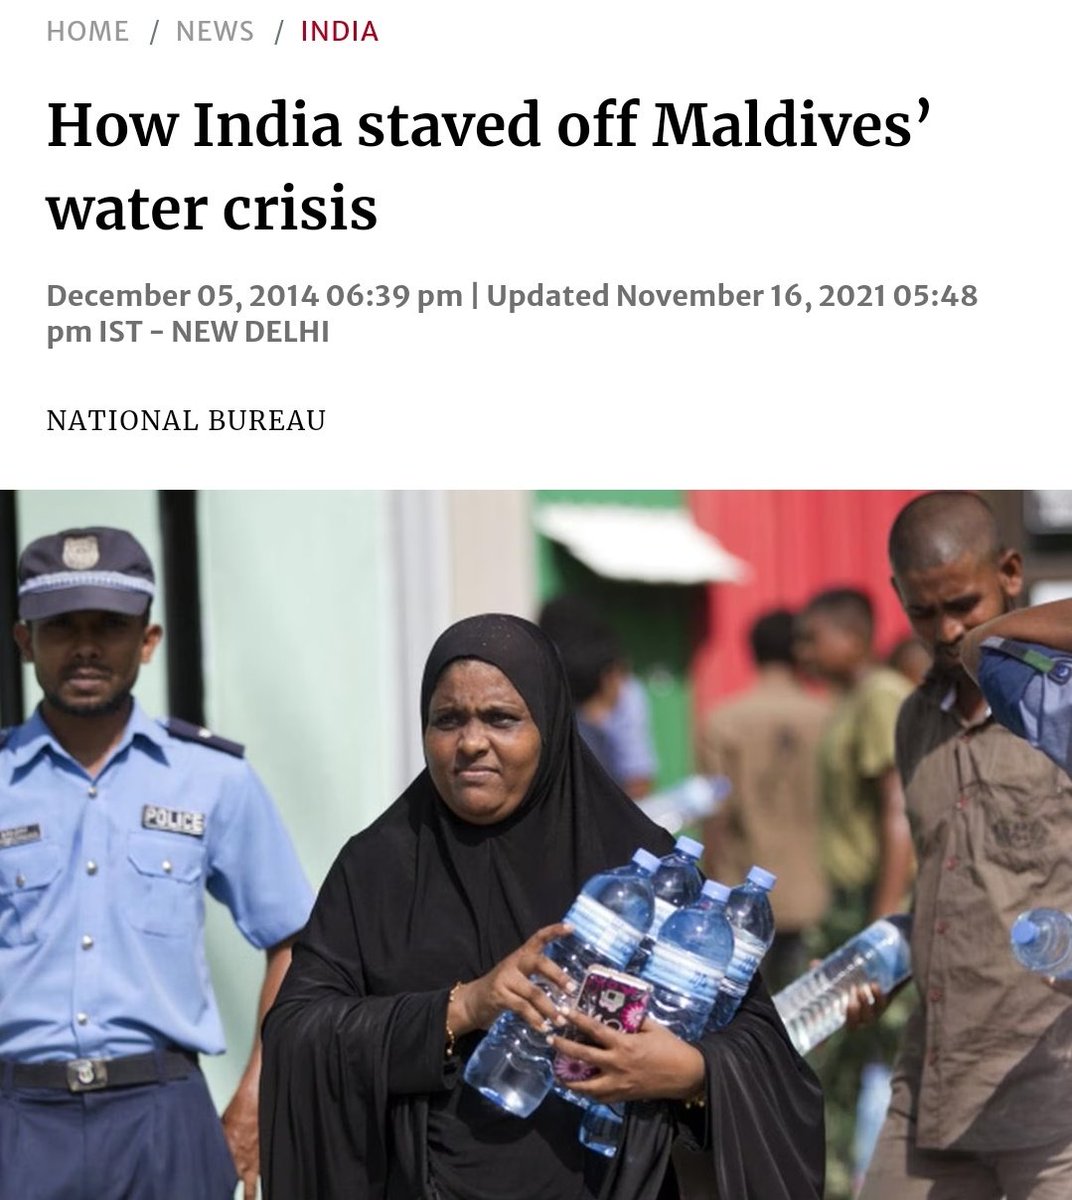 Operation Neer: India supplied drinking water to Maldives during water crisis in December 2014. And, India was the first country to respond directly.